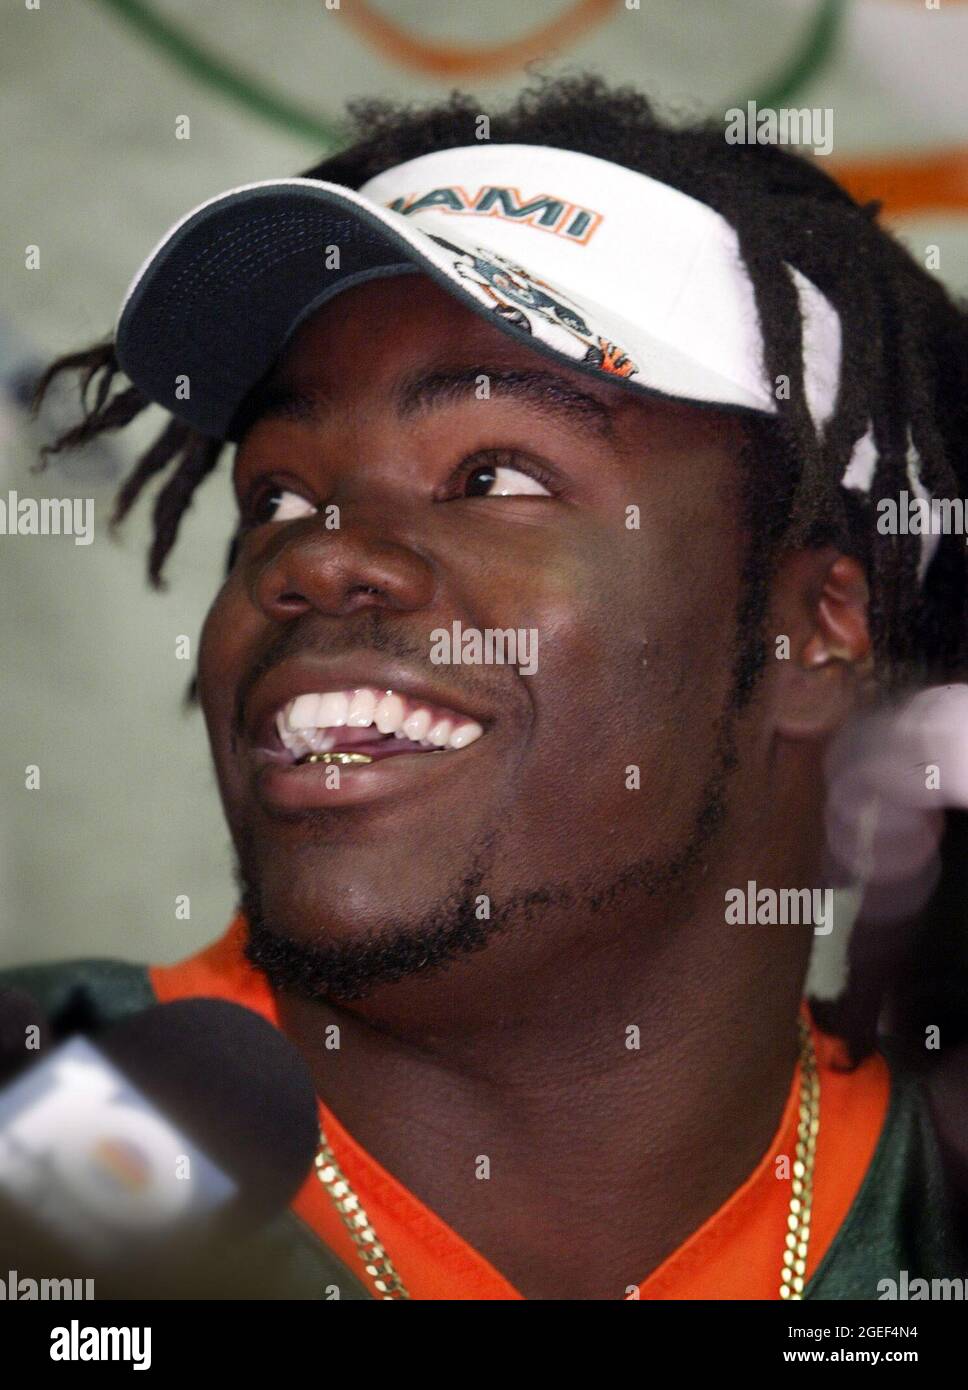 Miami, USA. 05th Feb, 2003. Bryan Pata, who played on the University of Miami football team, was shot and killed after practice on November 7, 2006. Pata appears here after he signed to attend Miami in February 2003. (Photo by Chuck Fadely/Miami Herald/TNS/Sipa USA) Credit: Sipa USA/Alamy Live News Stock Photo